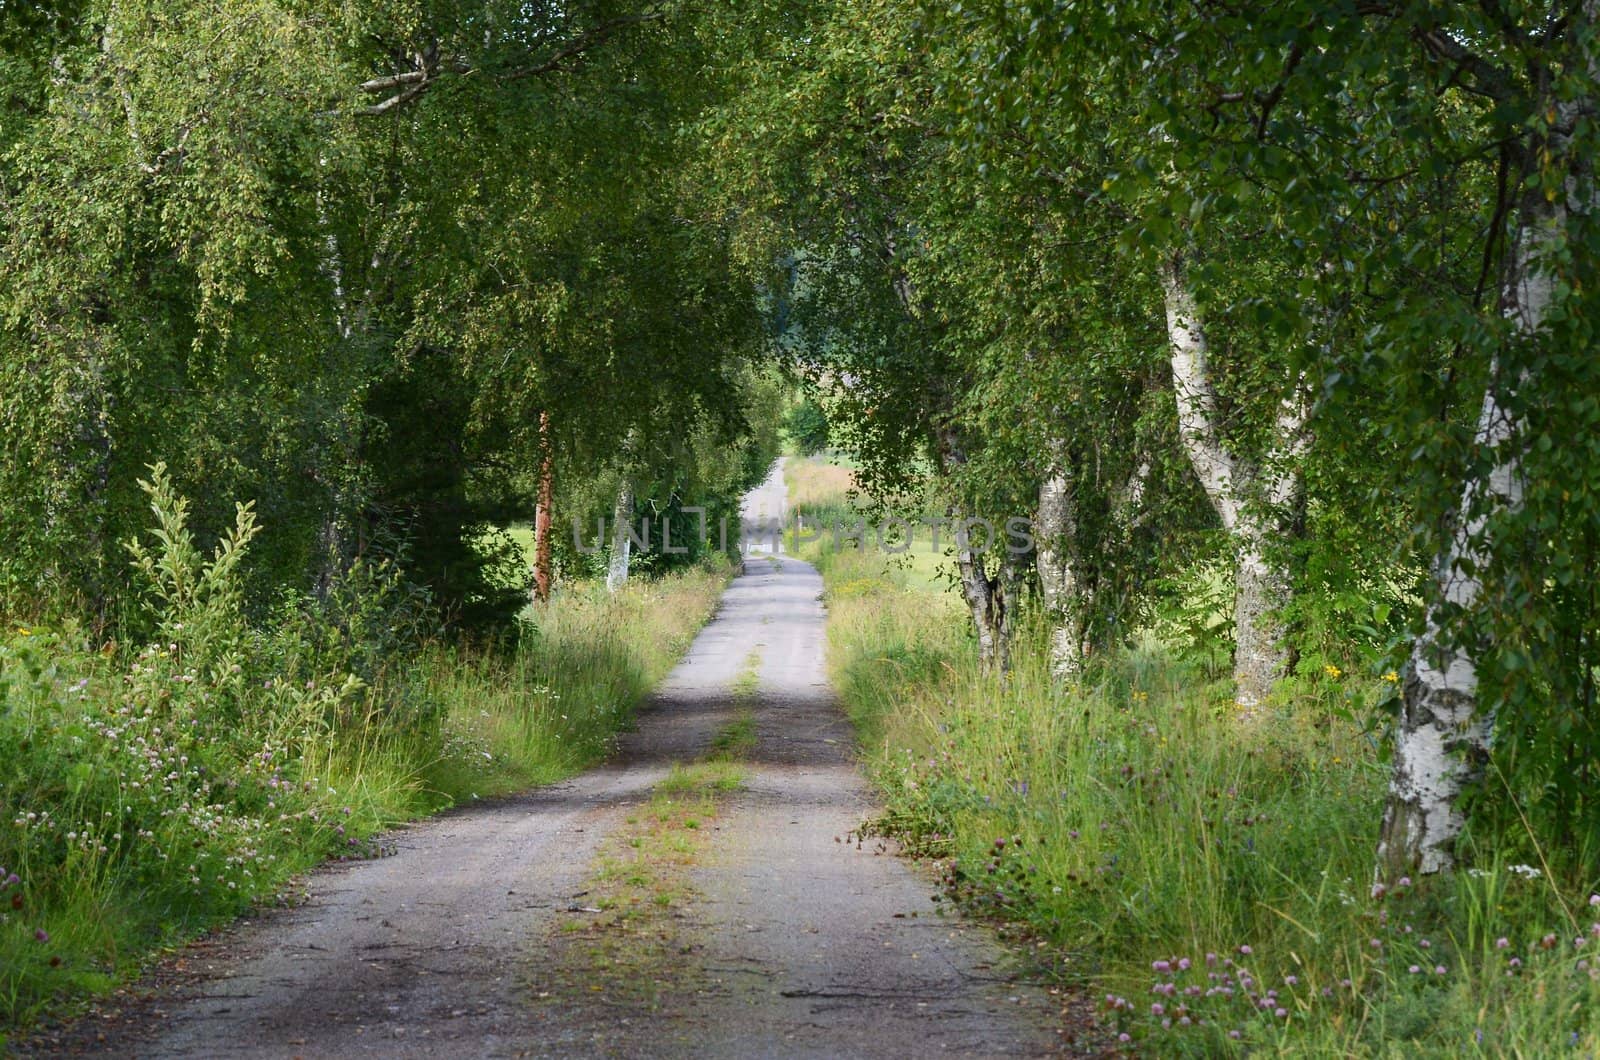 A small narrow road surrounded by birch trees winding up in rural areas